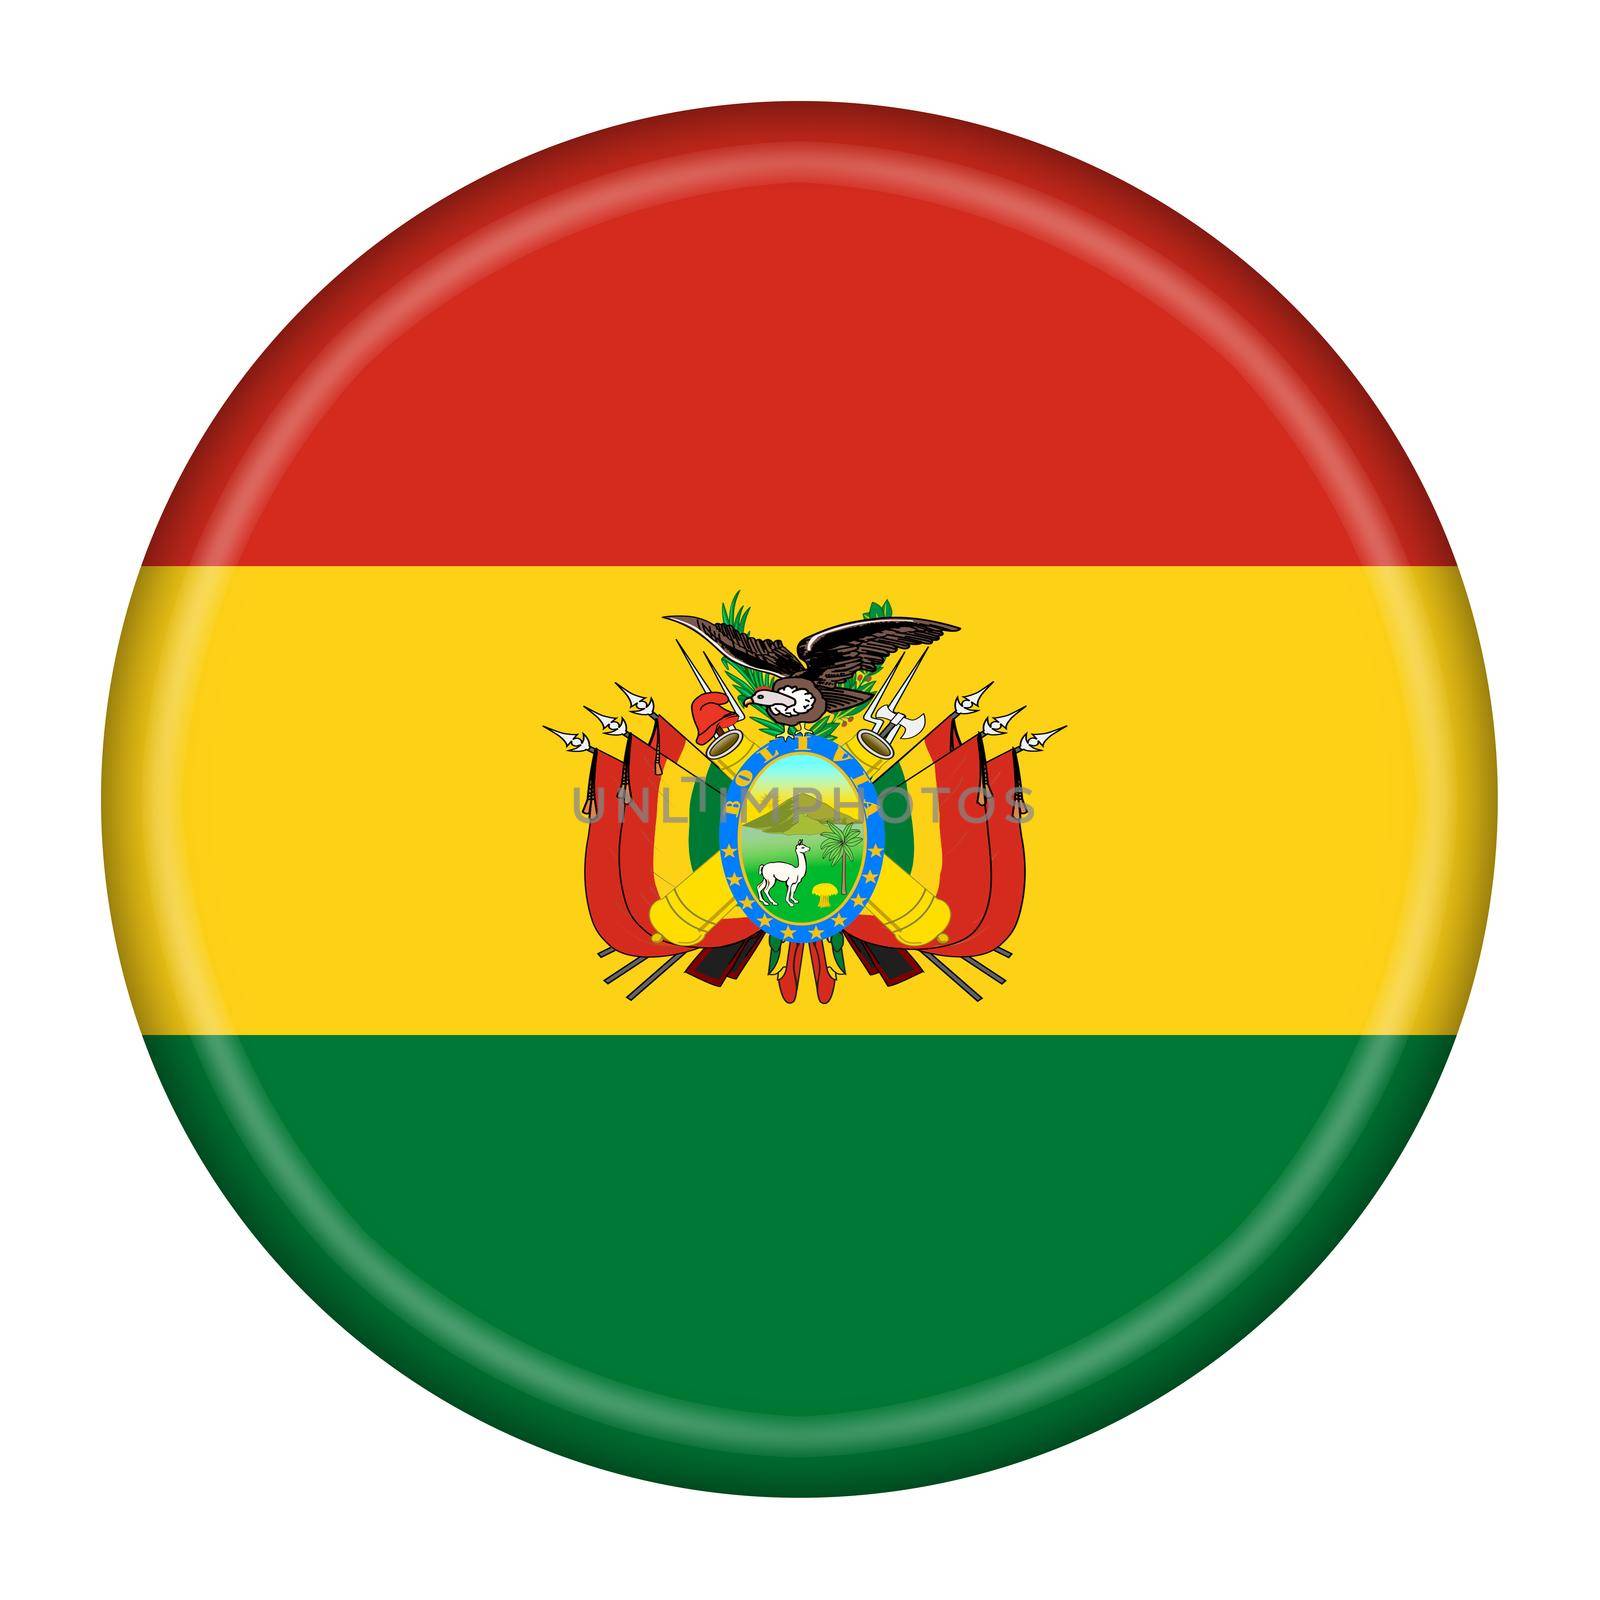 A Bolivia flag button 3d illustration with clipping path